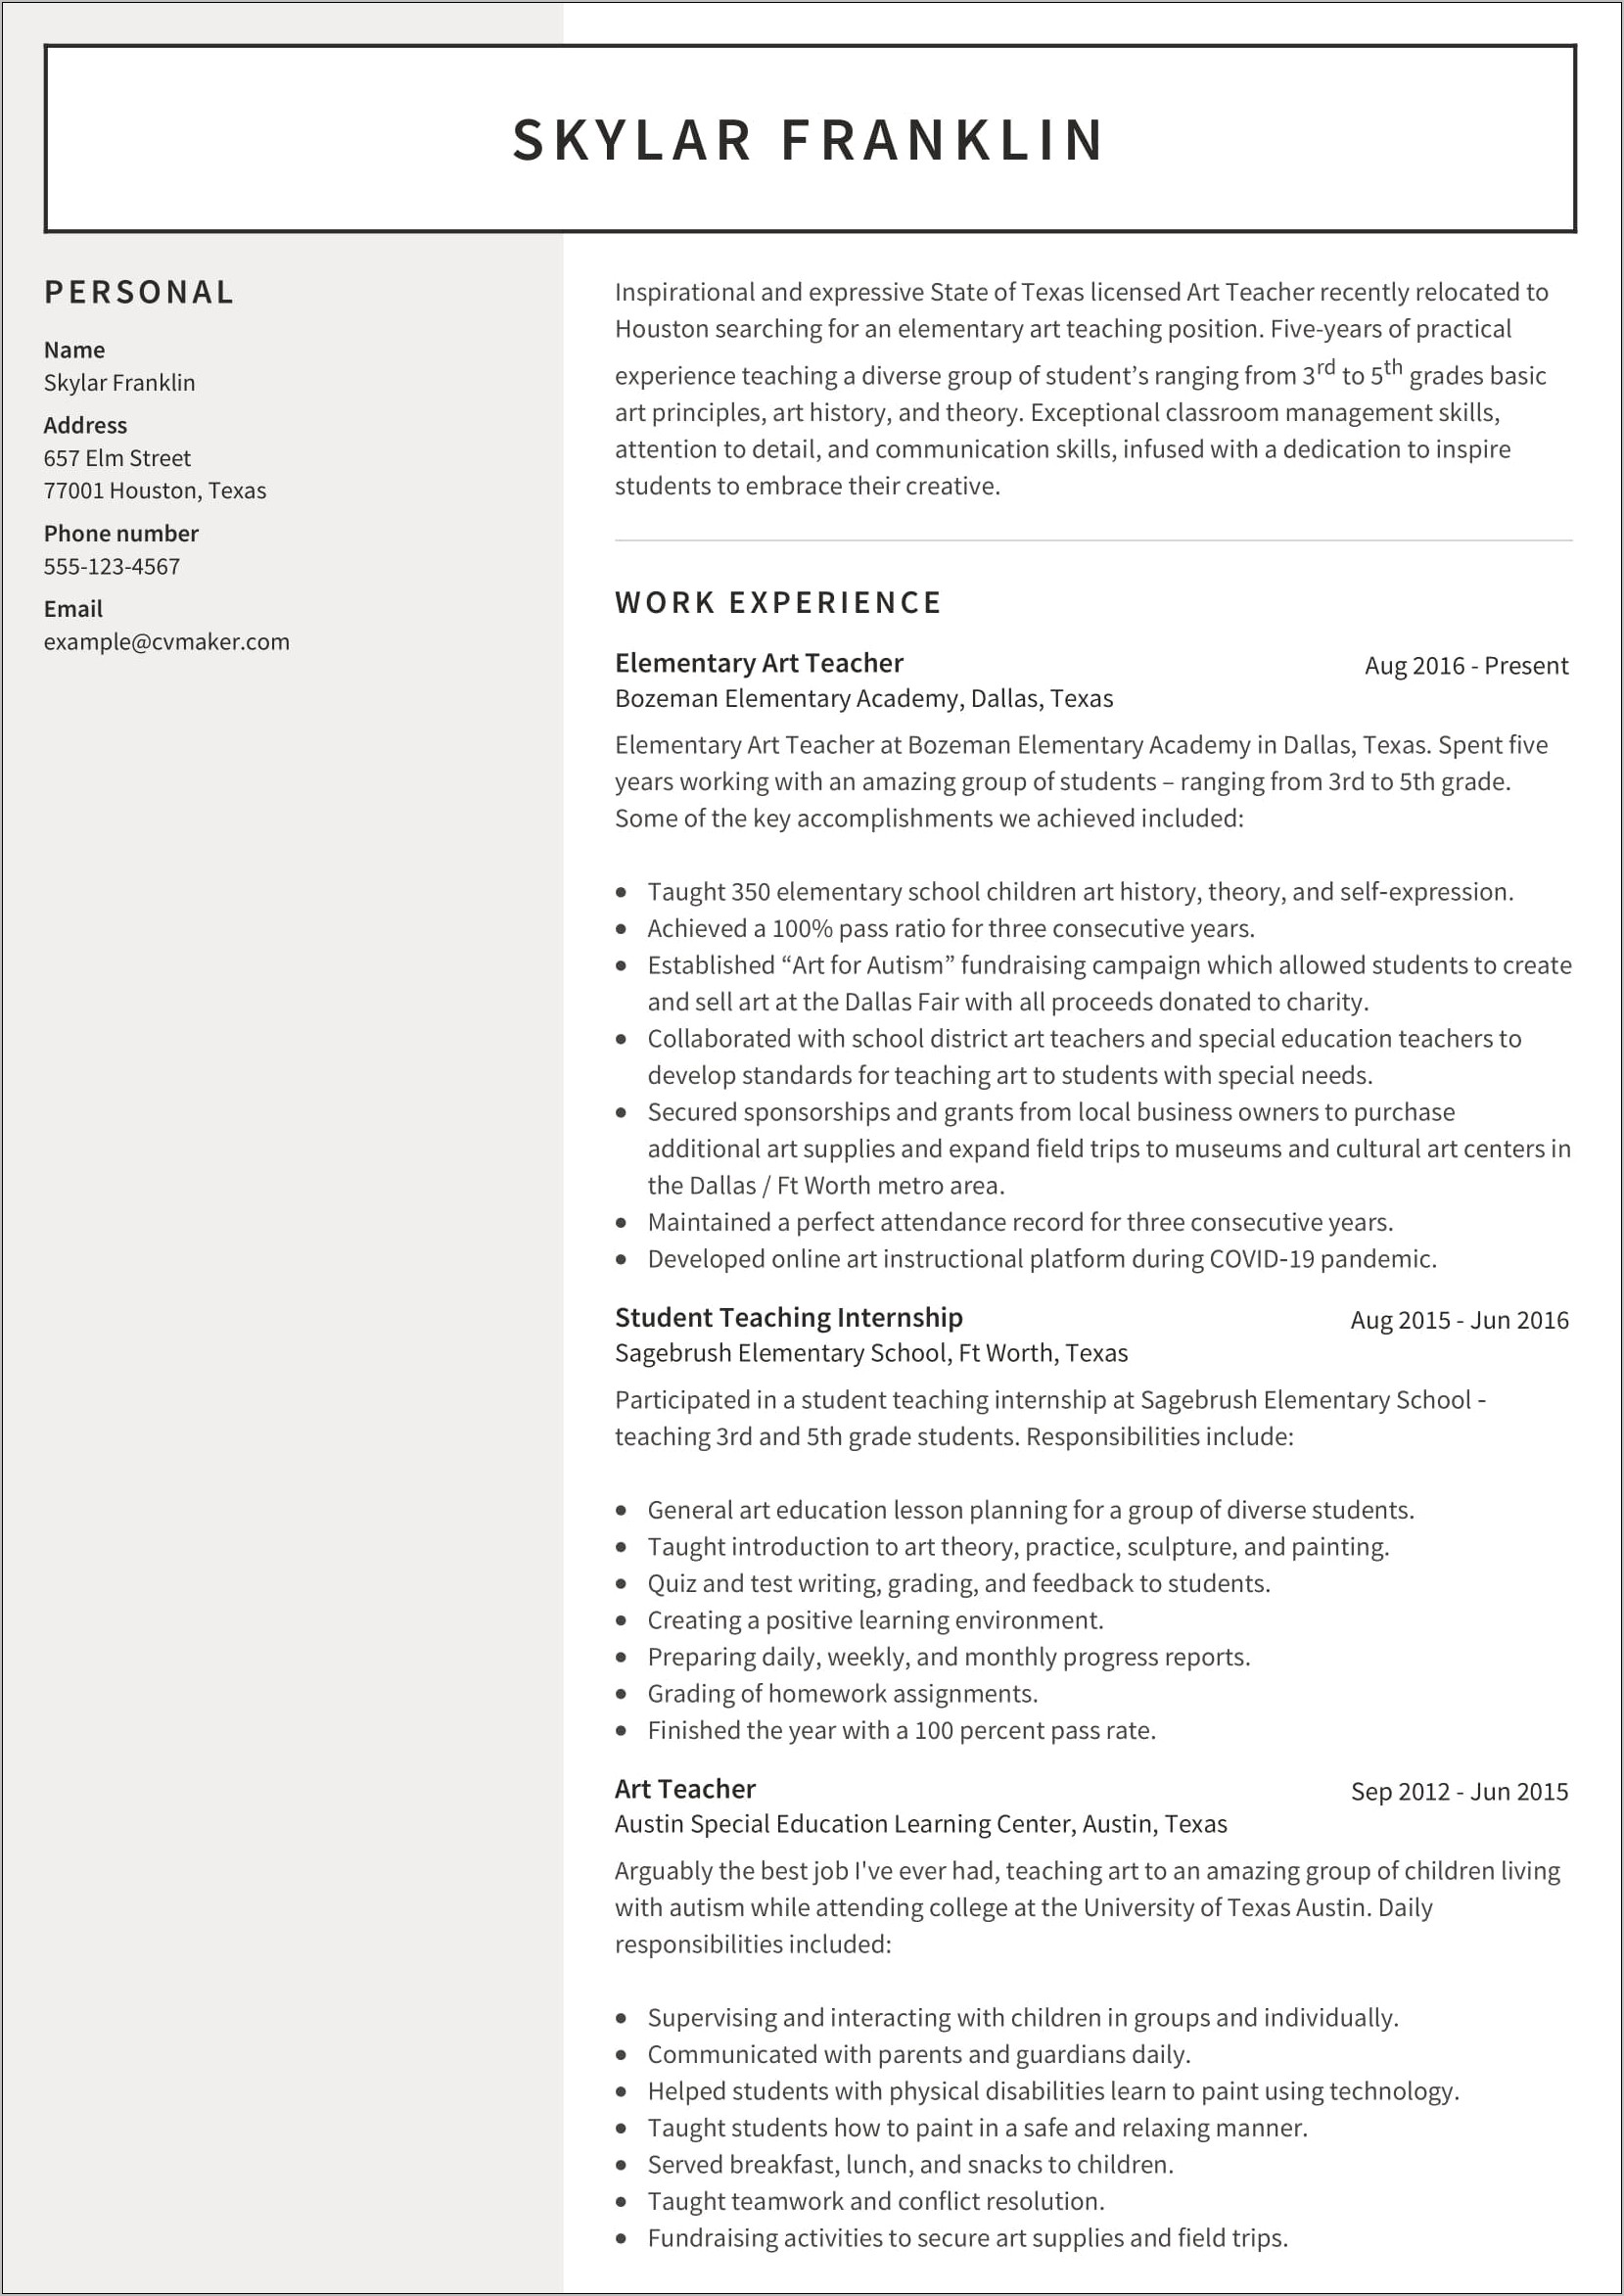 Resume Work History While In School